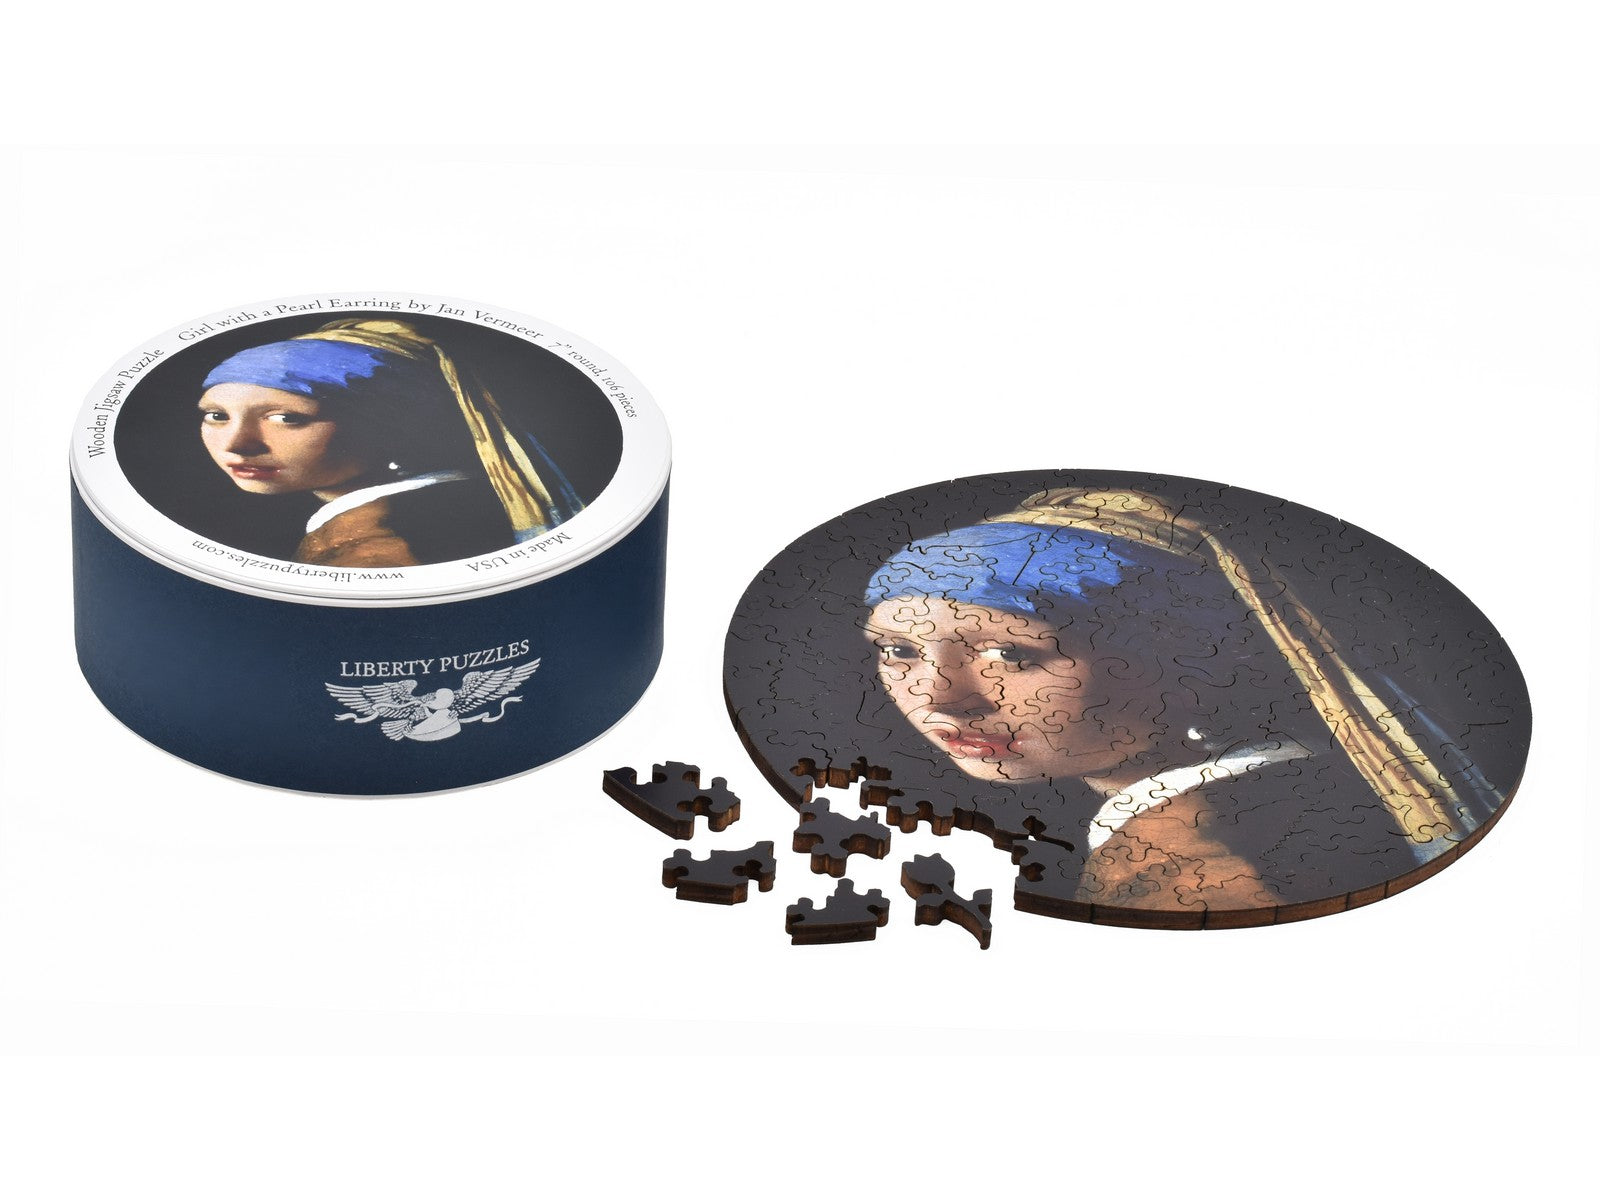 The puzzle, Girl with a Pearl Earring, shown with the box it comes in.